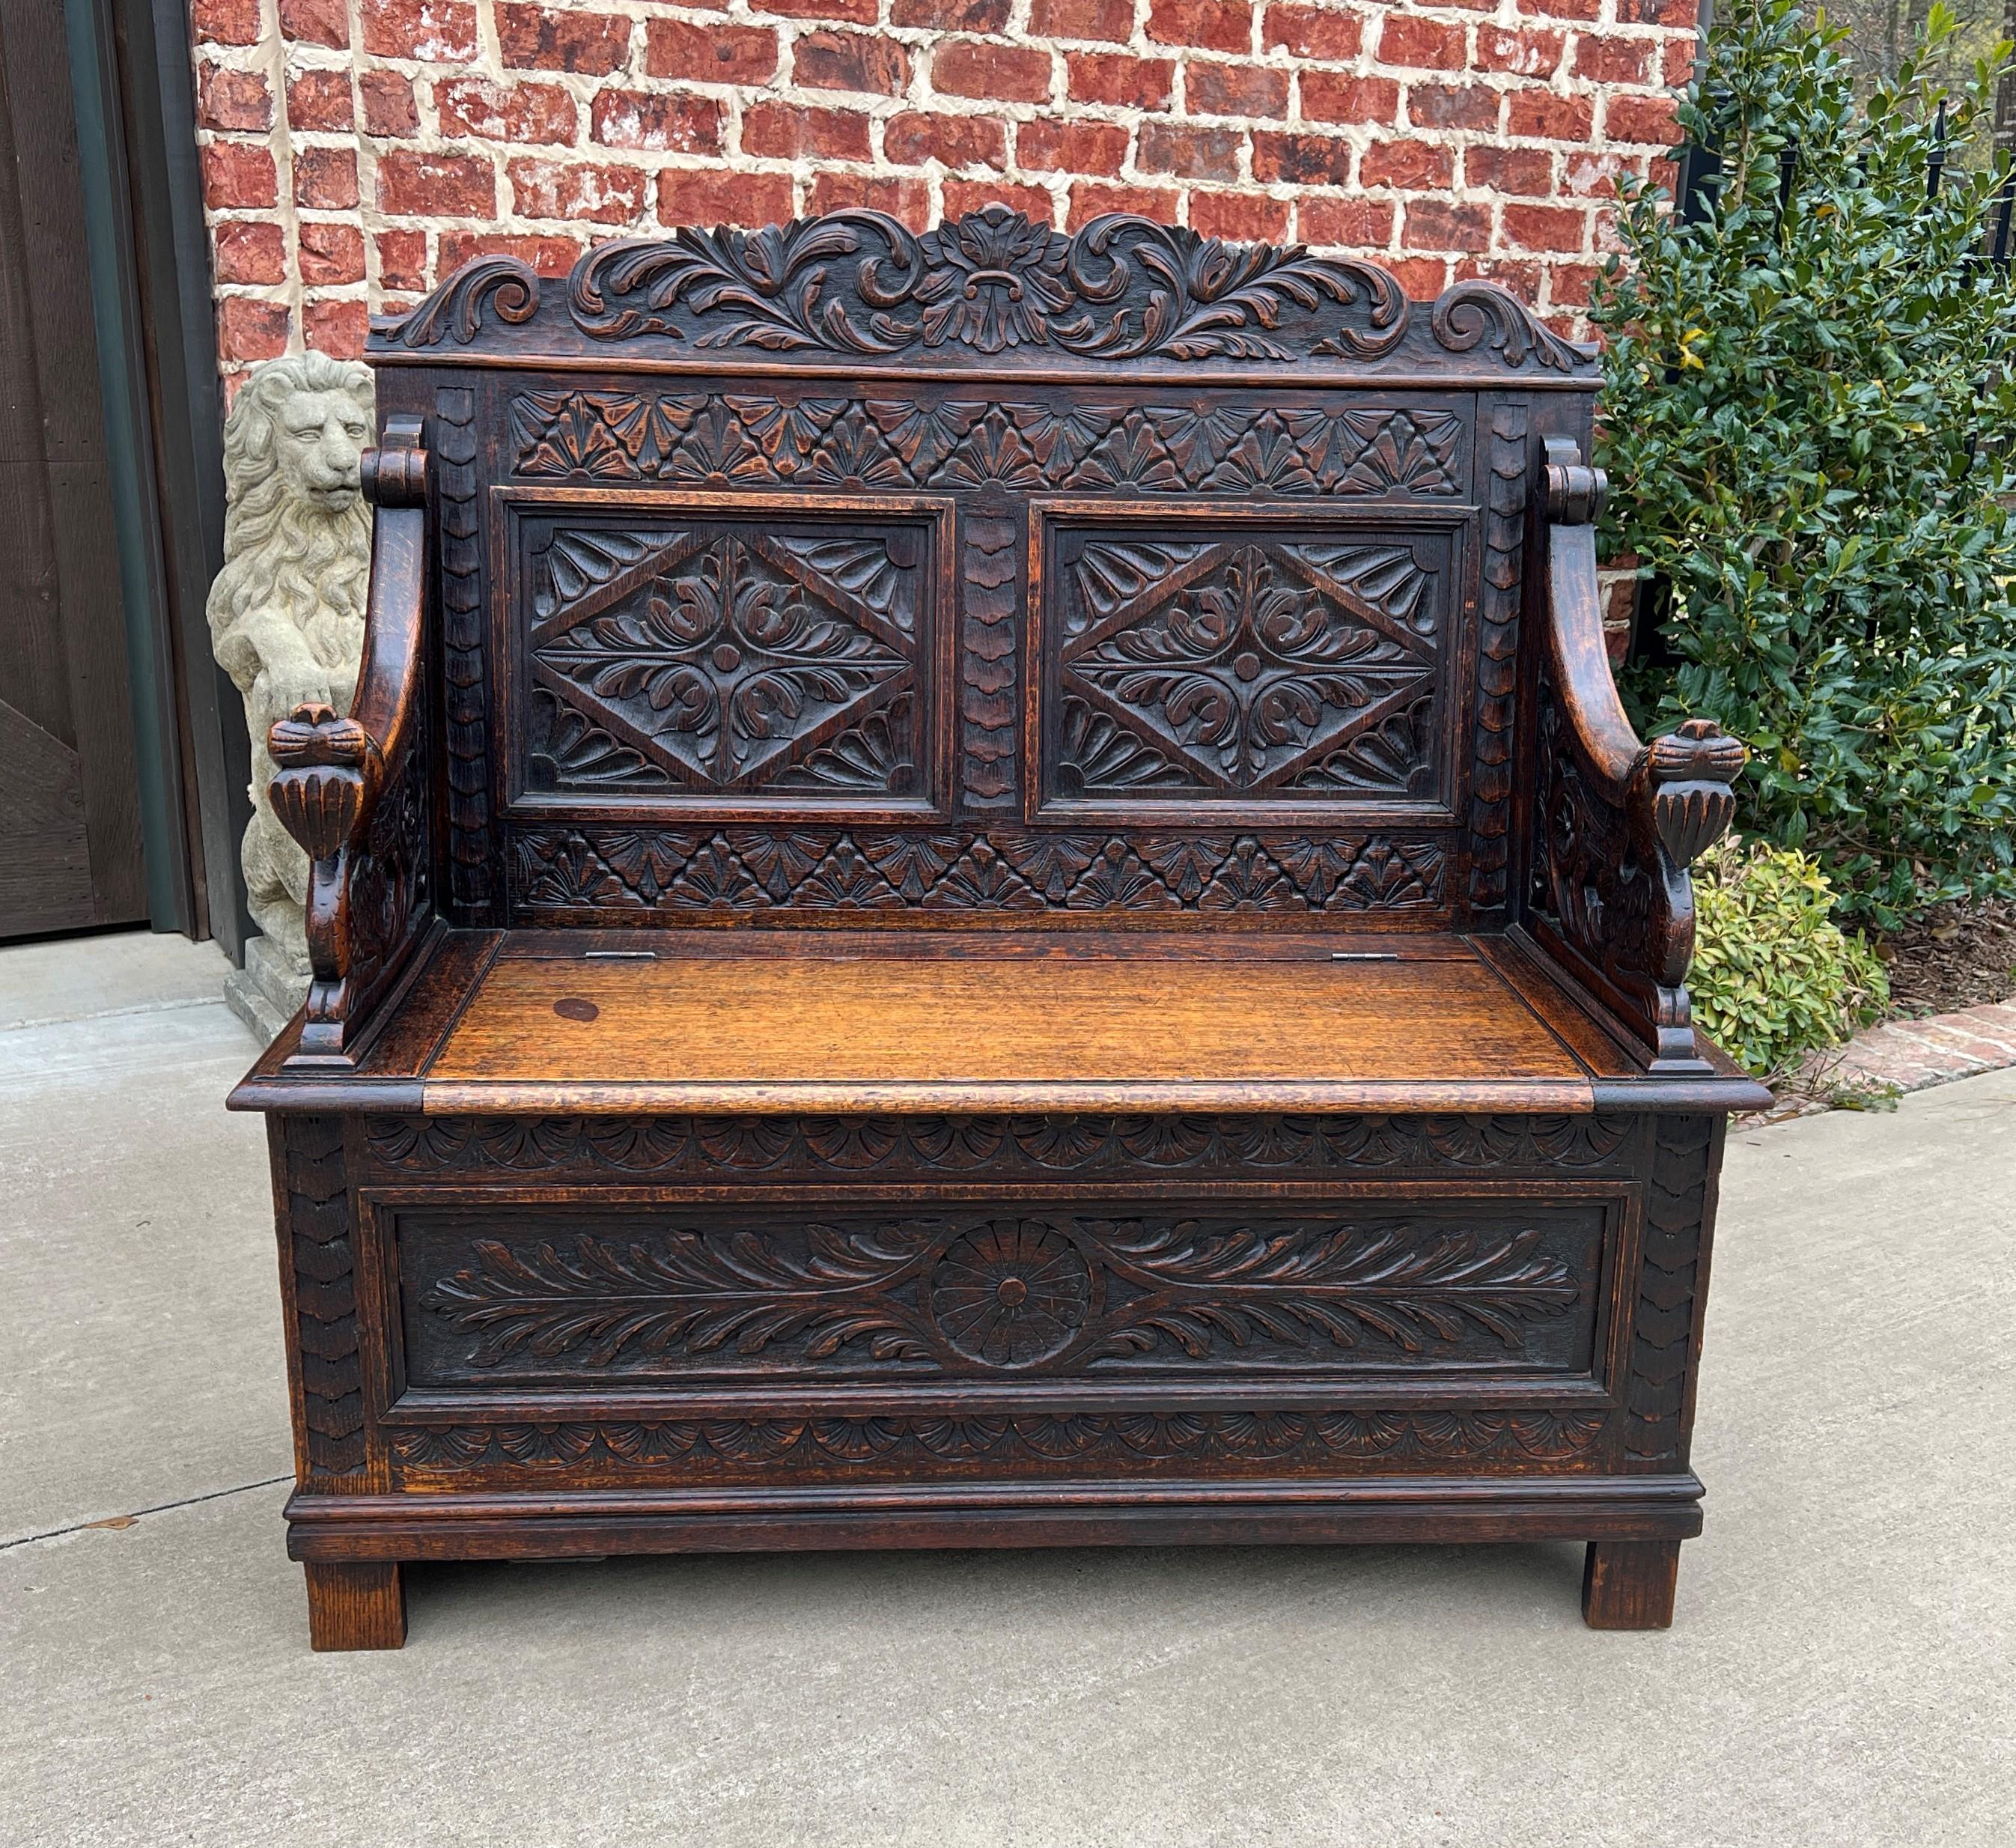 Charming antique English oak petite renaissance revival hall seat, bench or chair~~highly carved ~~circa
1880s.
Hard-to-find petite size~~wonderful 